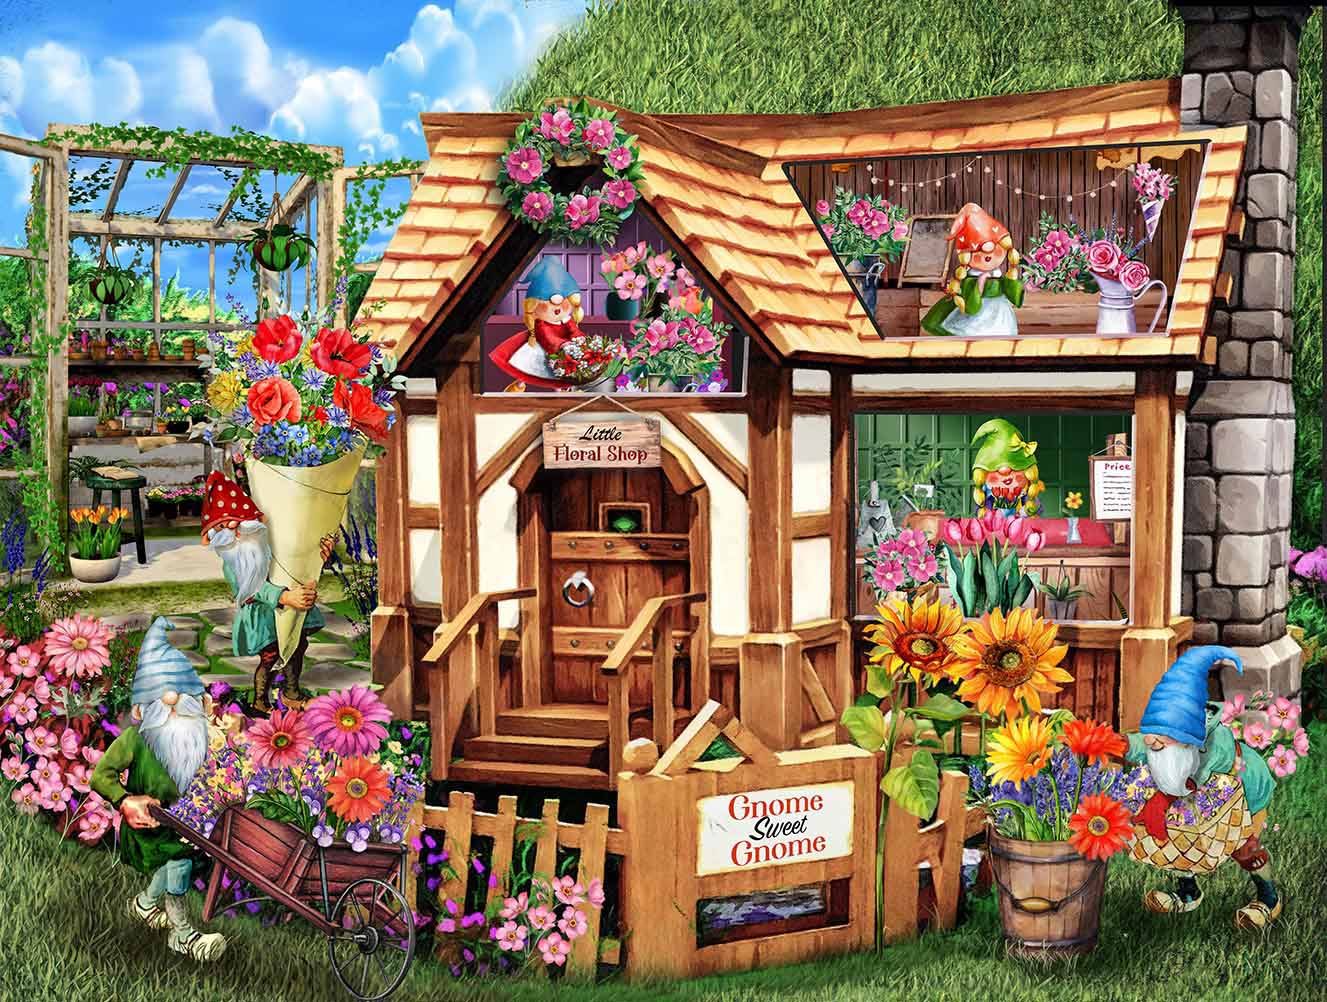 Gnome Sweet Gnome Flower & Garden Jigsaw Puzzle